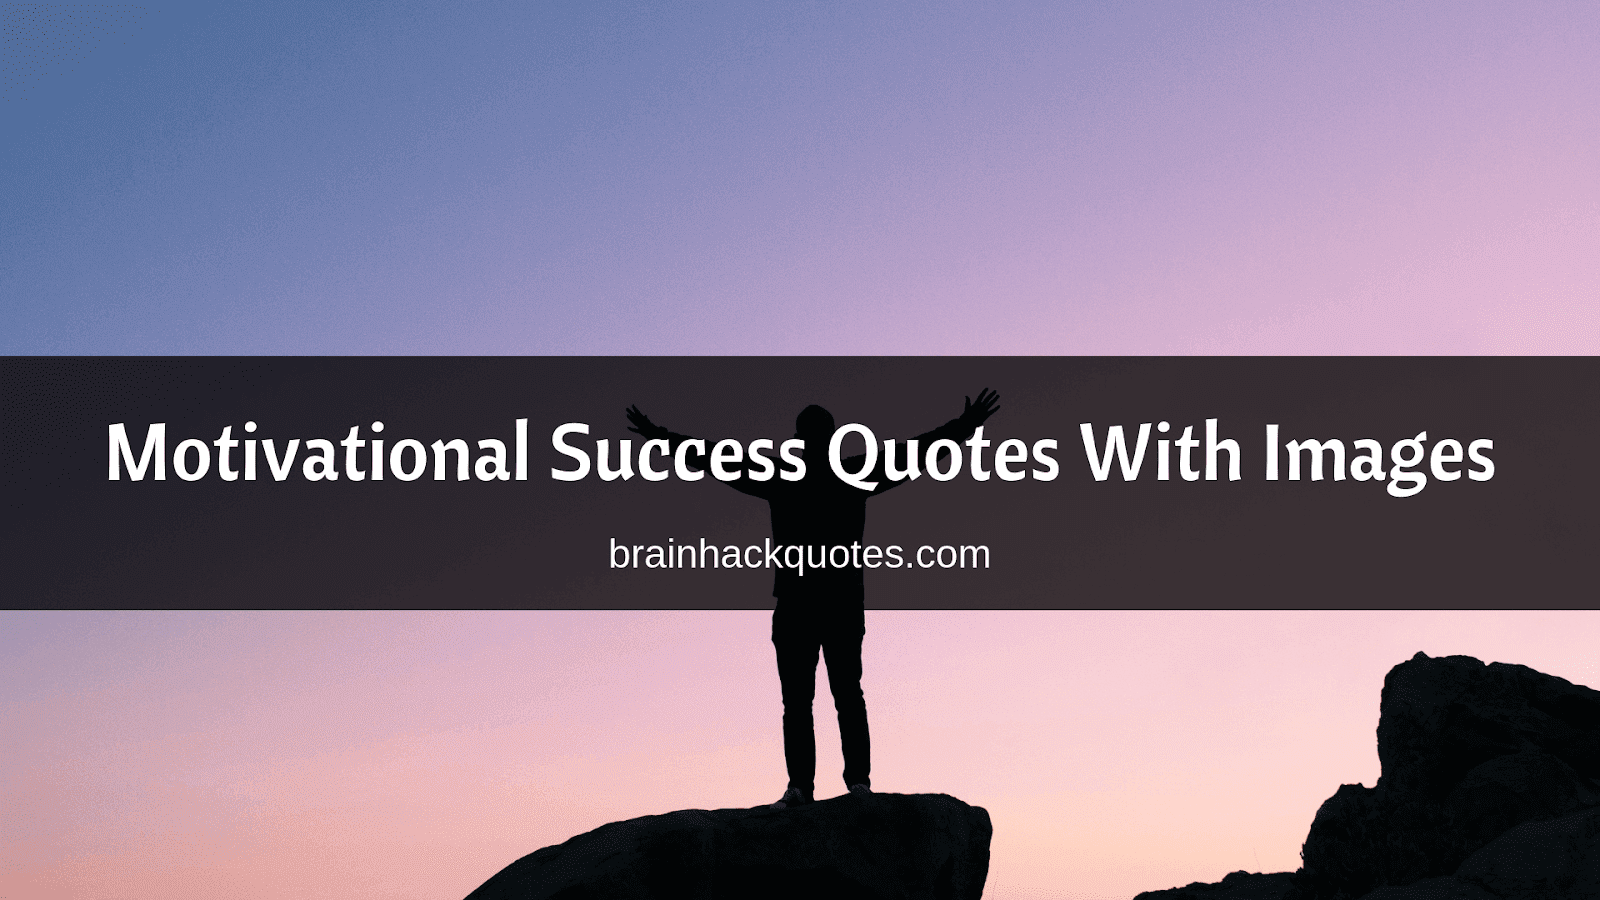 Motivational Success Quotes With Images - Silhouette - 1600x900 ...